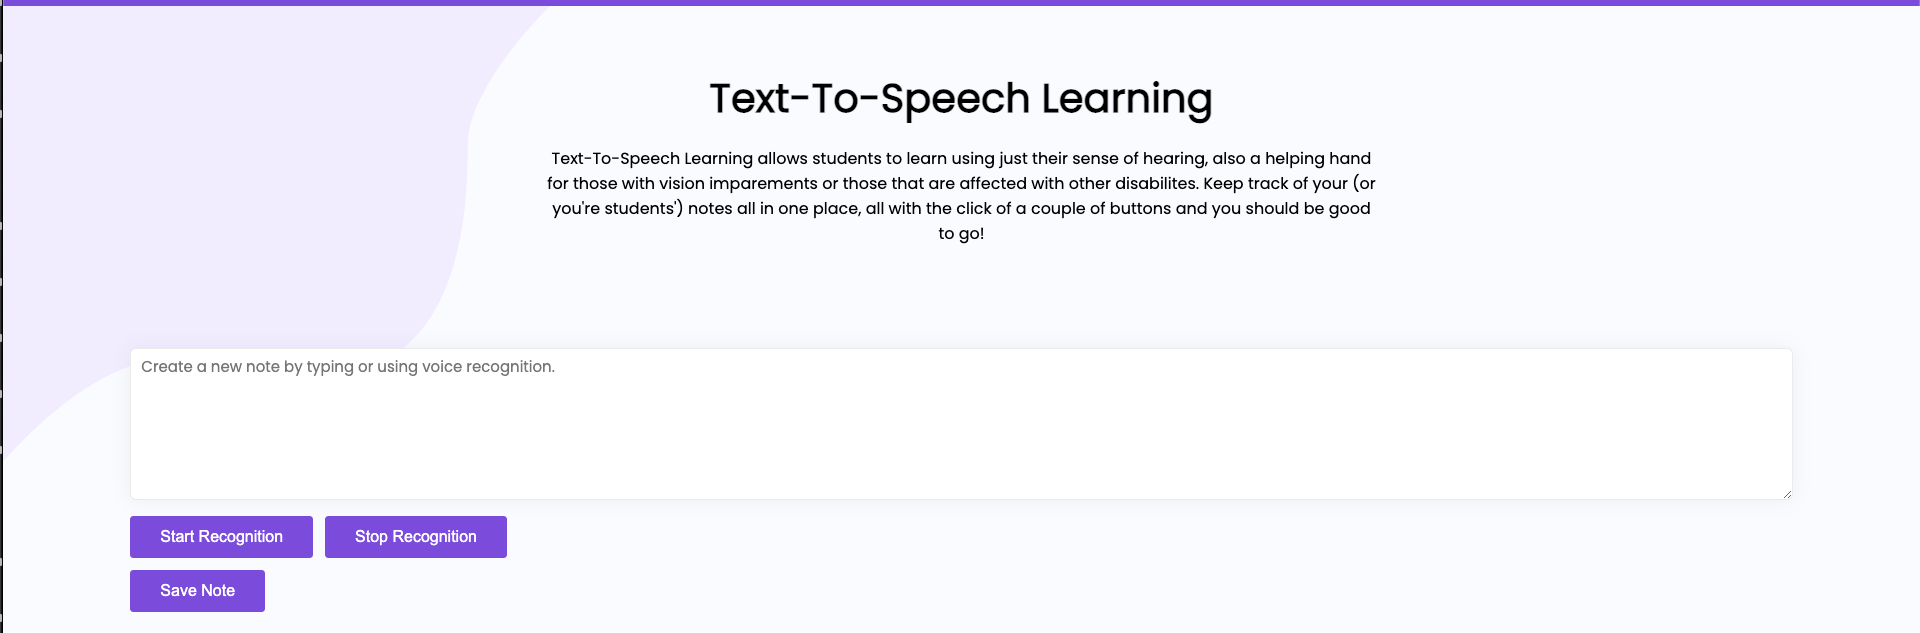 3 Simple Steps to Use Speech-to-Text in your Website!